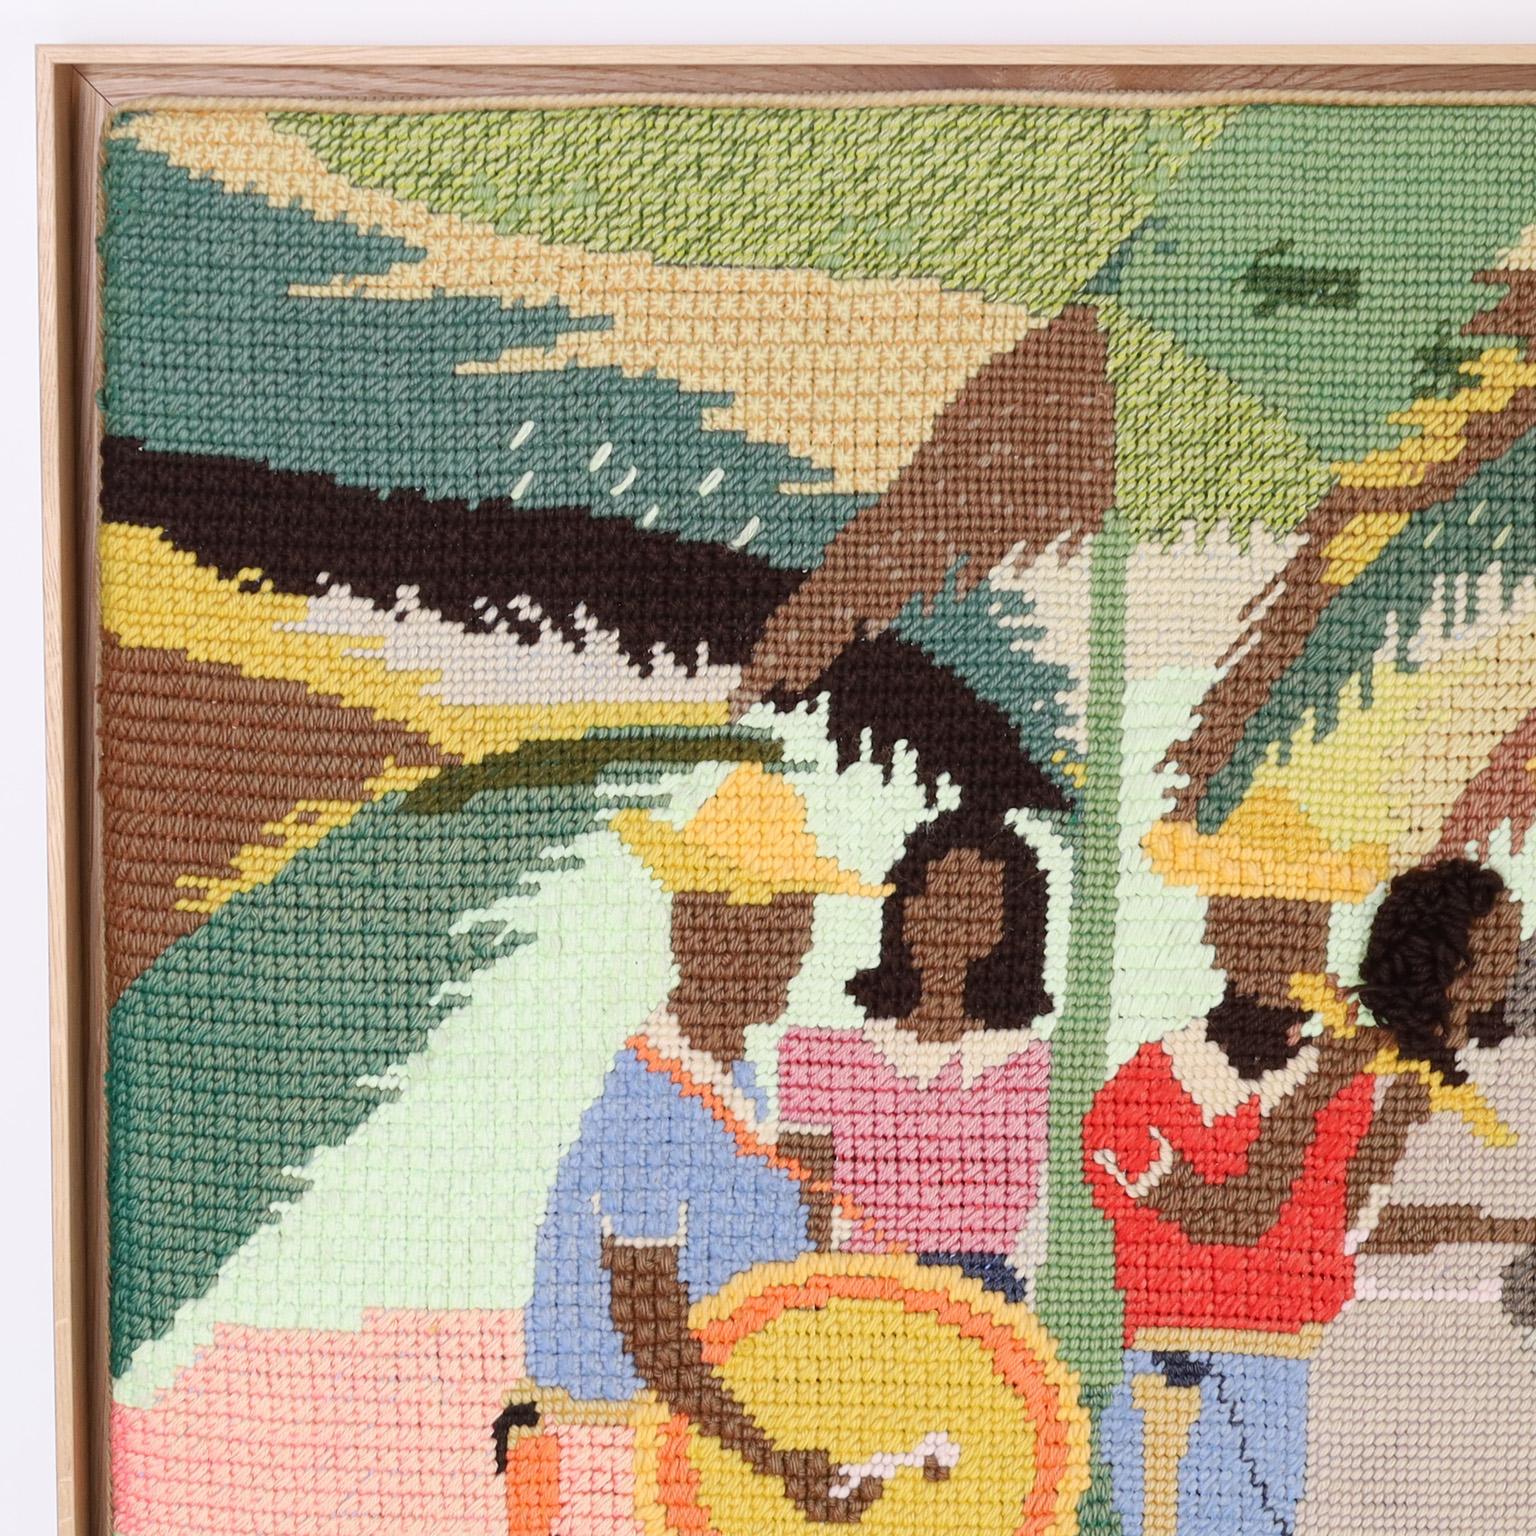 Needlepoint Wall Hanging with a Musical Theme - Folk Art Art by Unknown